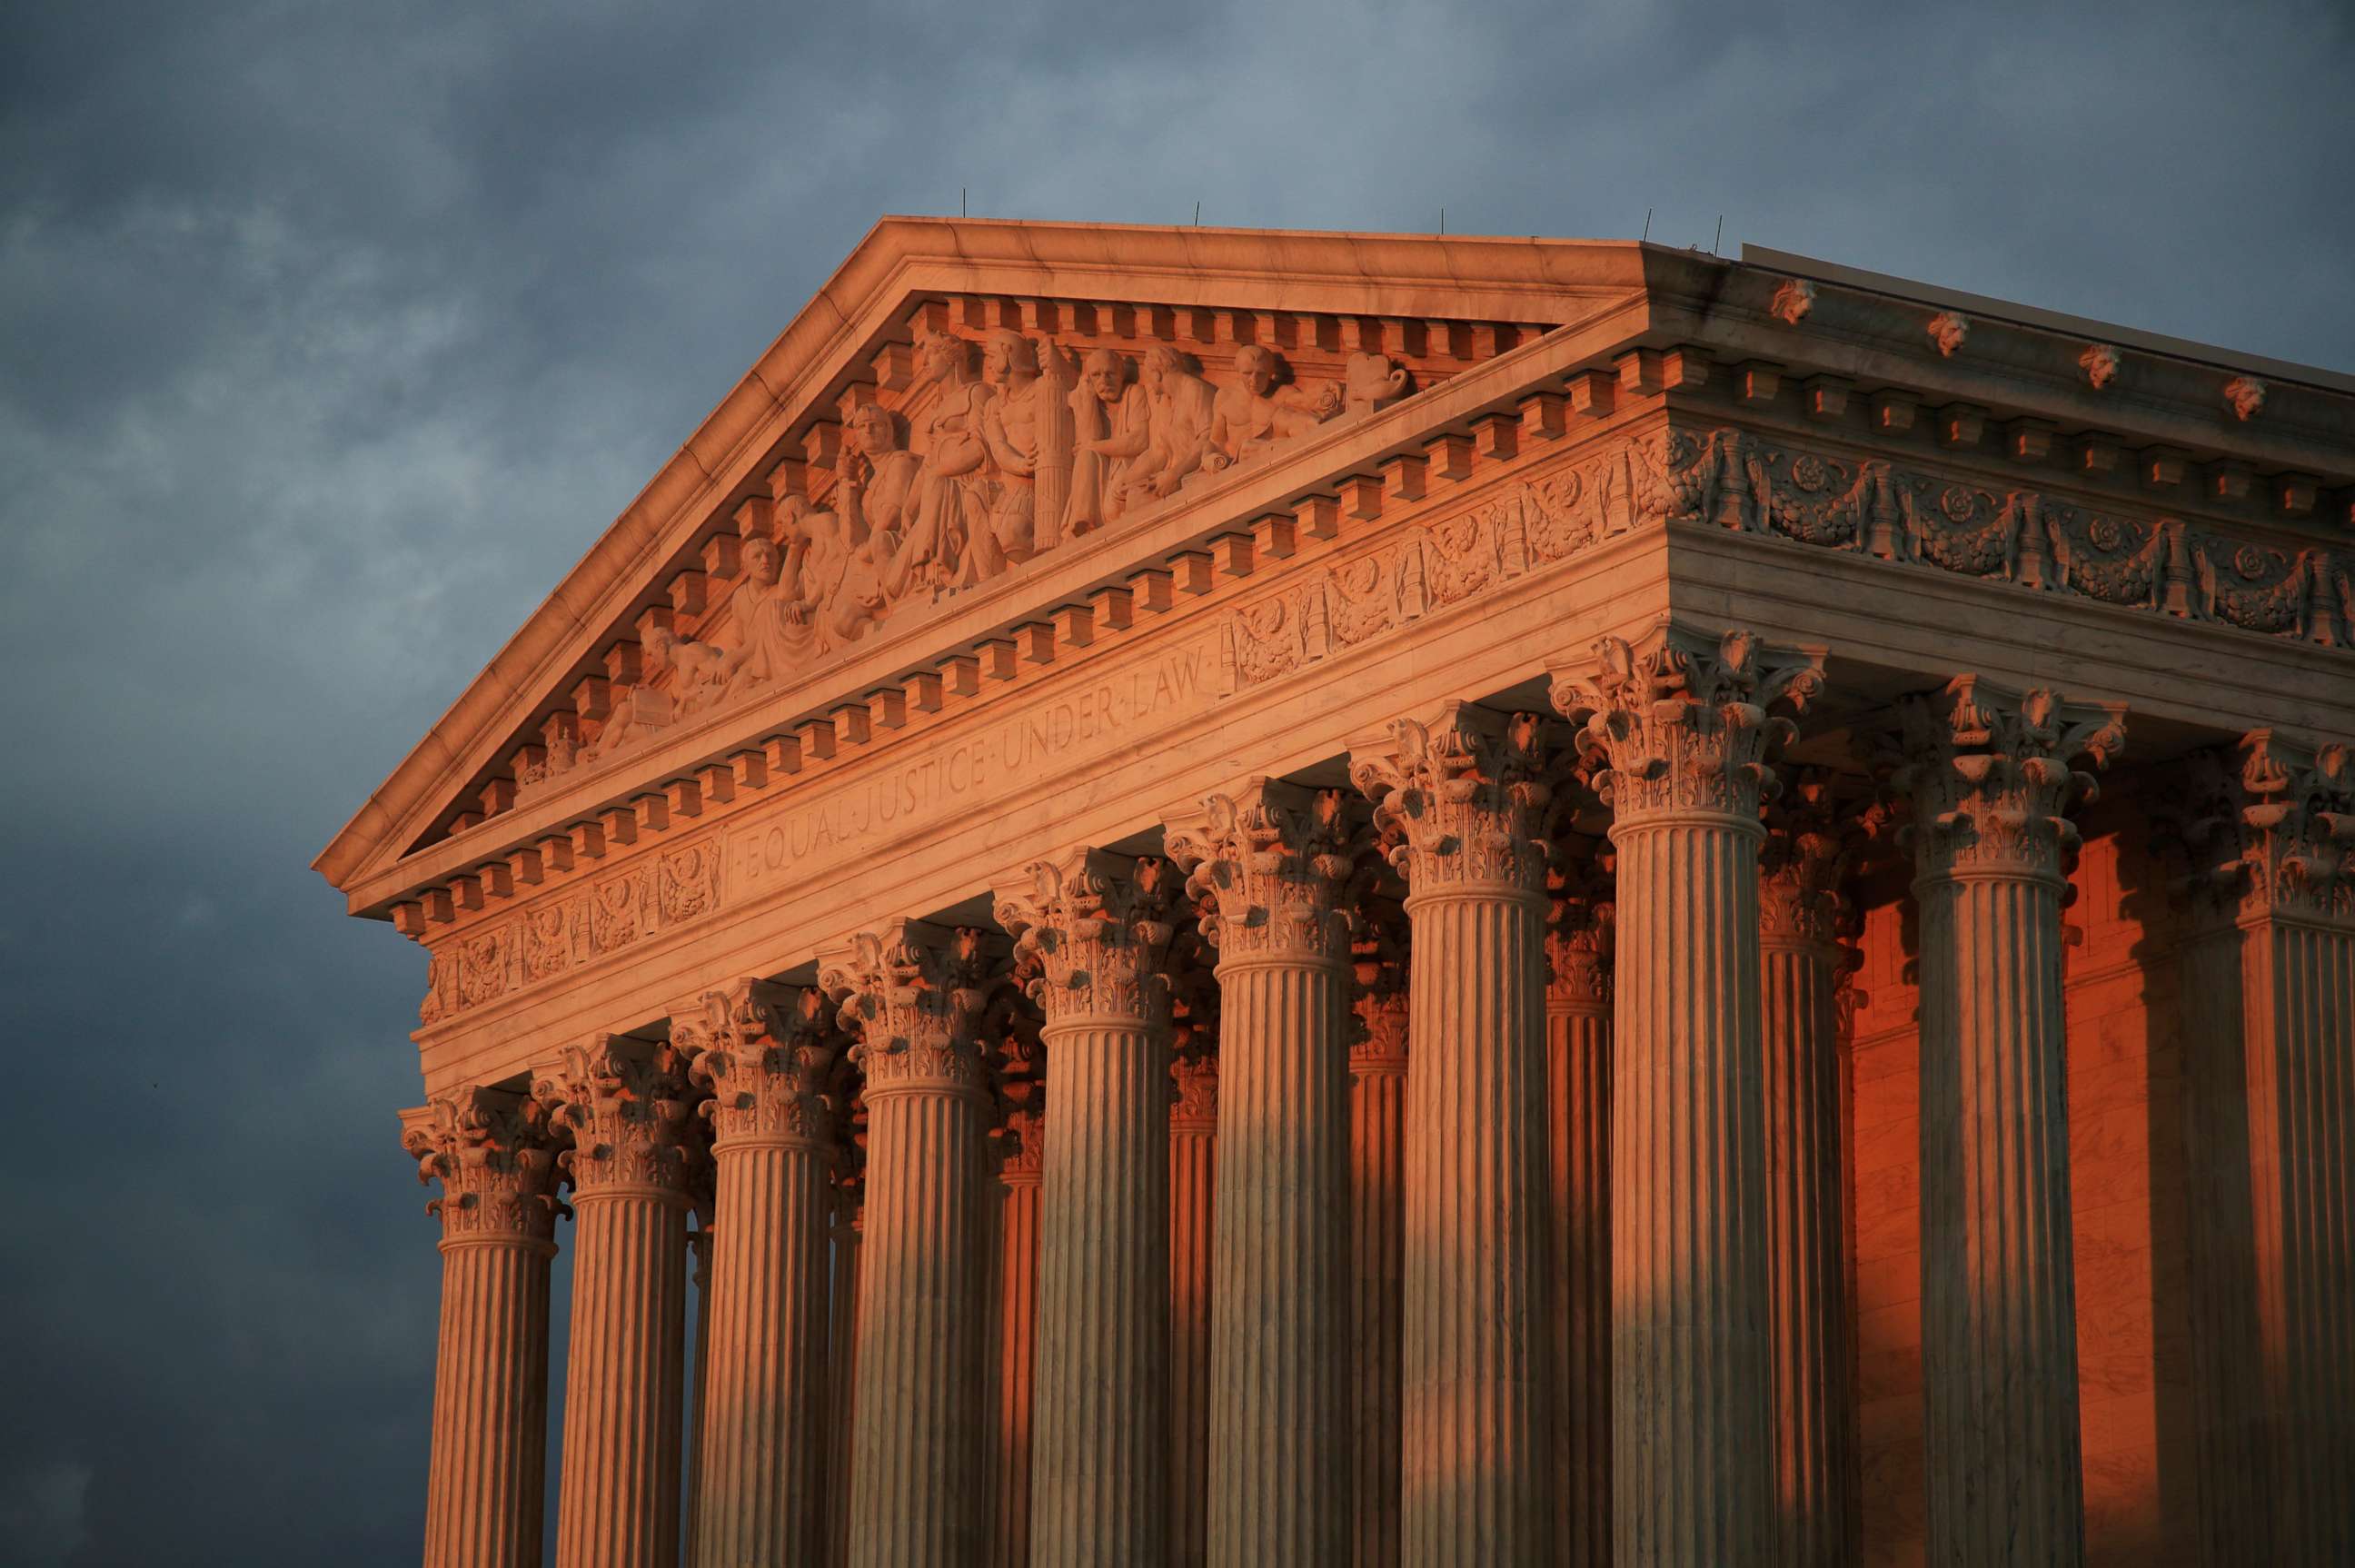 PHOTO: In this Oct. 4, 2018, file photo, The U.S. Supreme Court is seen at sunset in Washington, D.C.